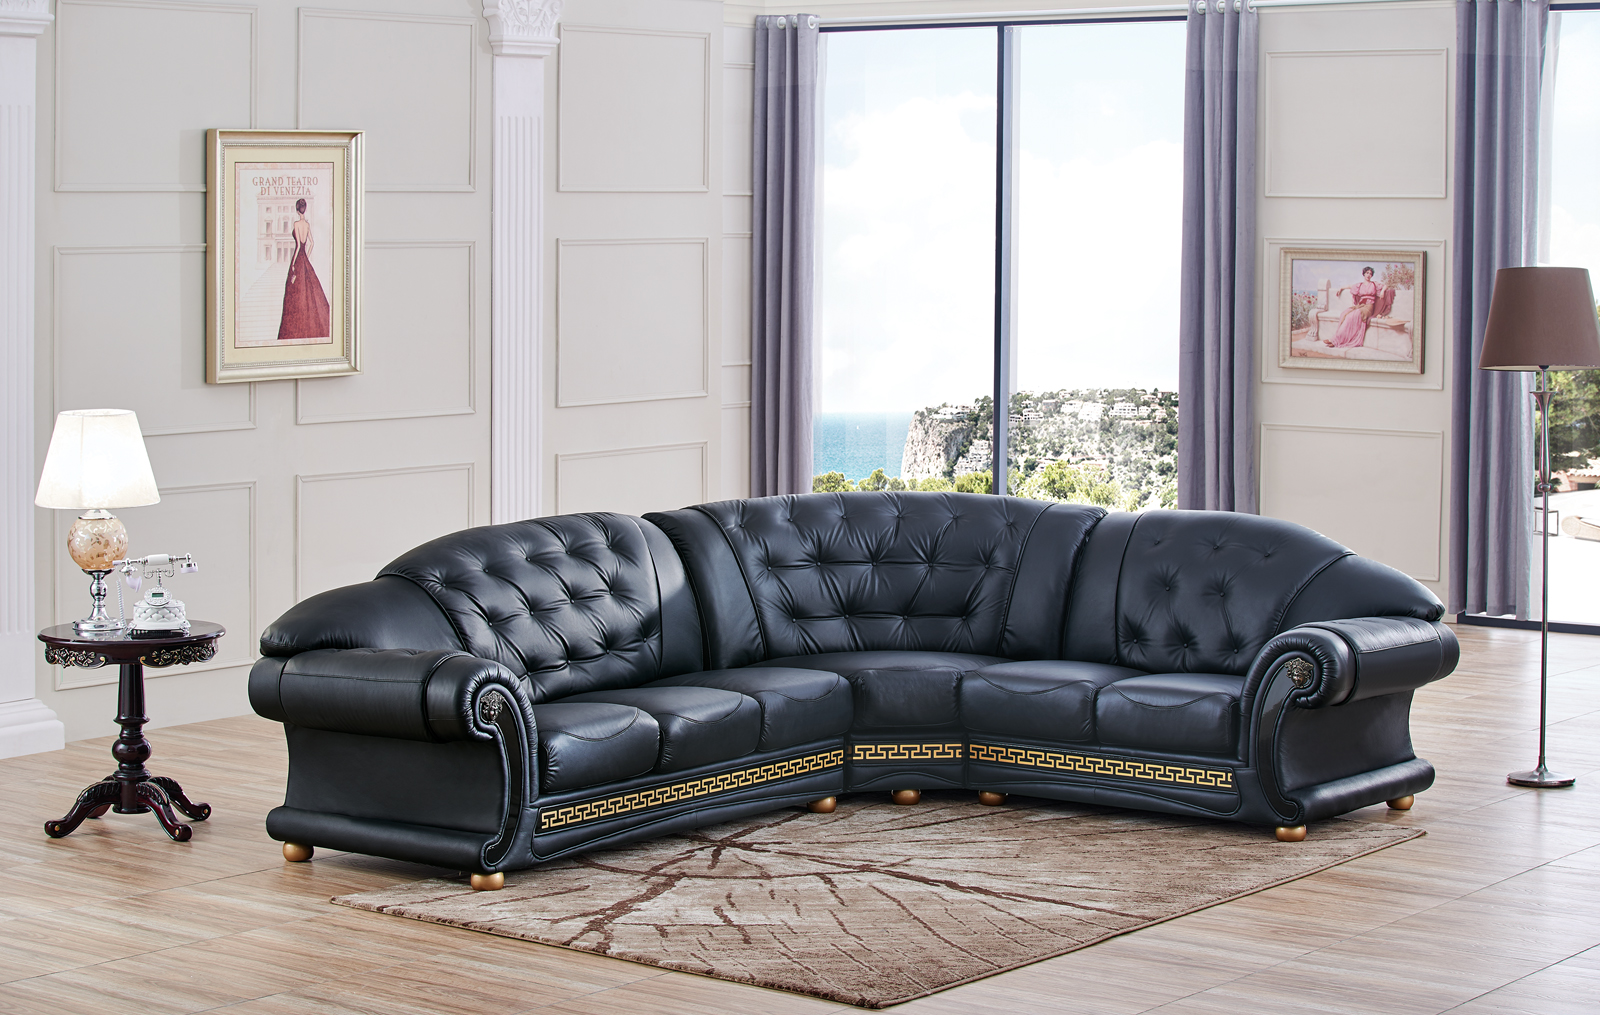 Black Sectional In A Living Room